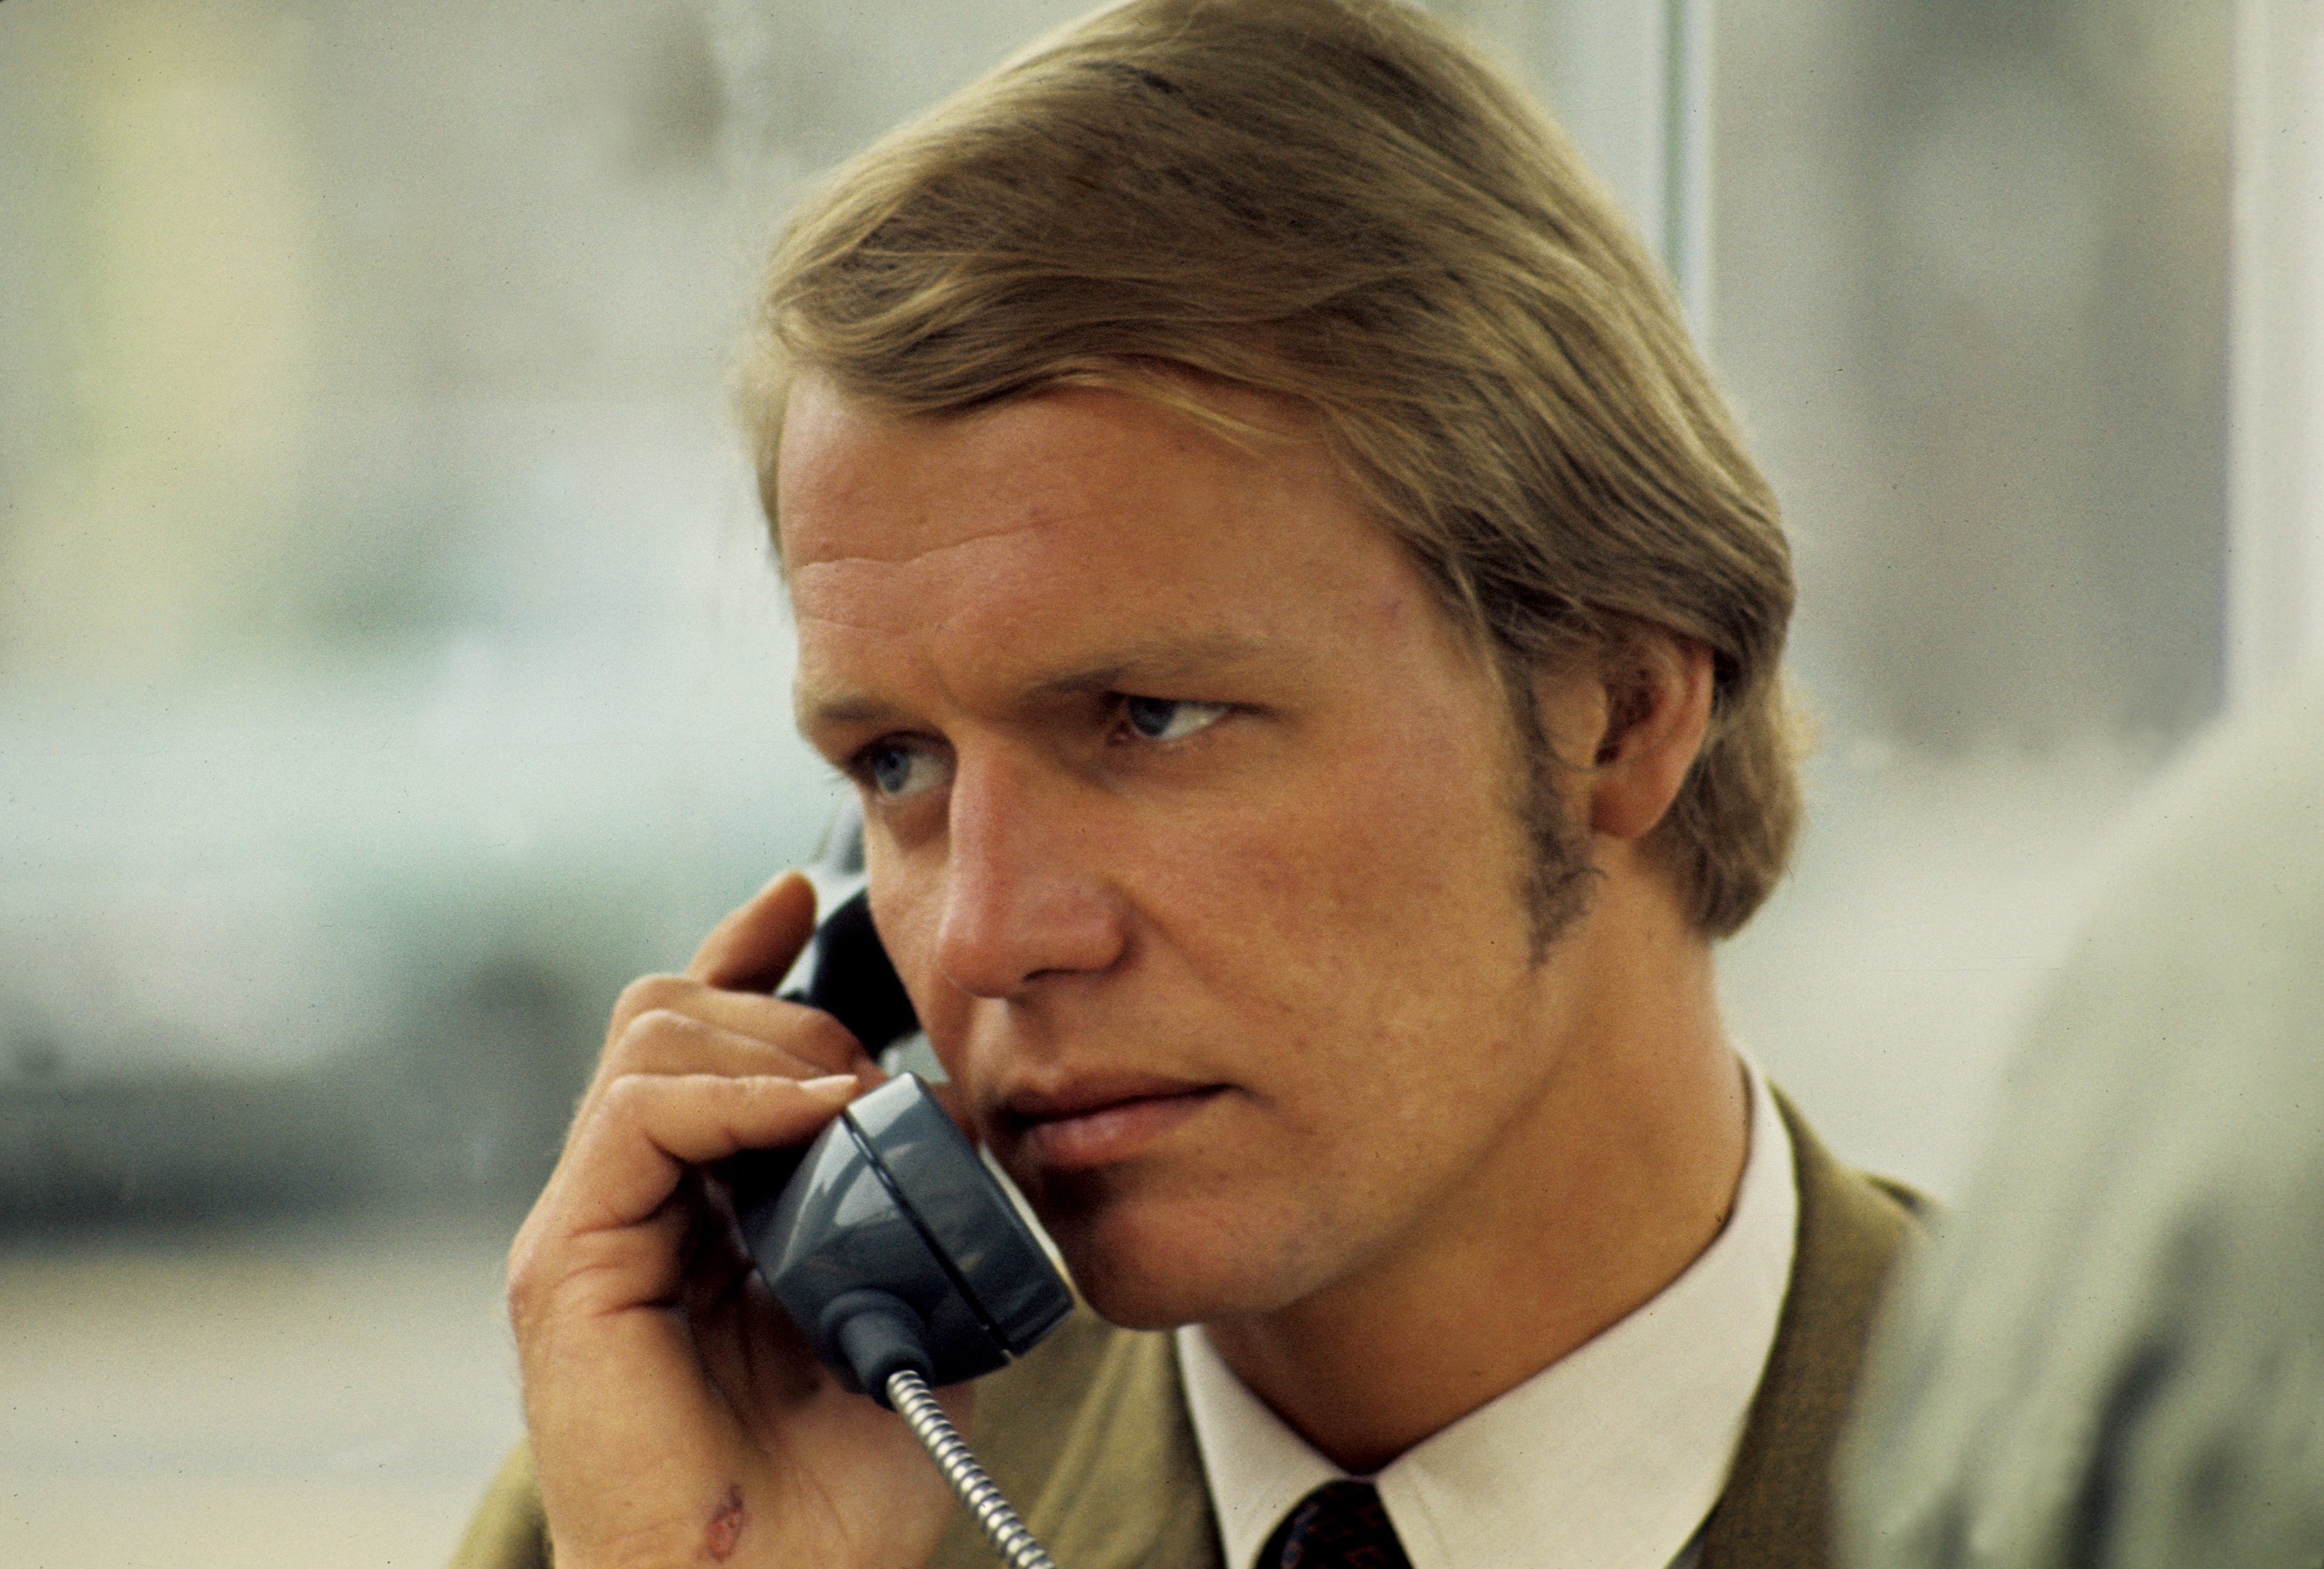 David Soul in "Halls of Mirrors" | Source: Getty Images